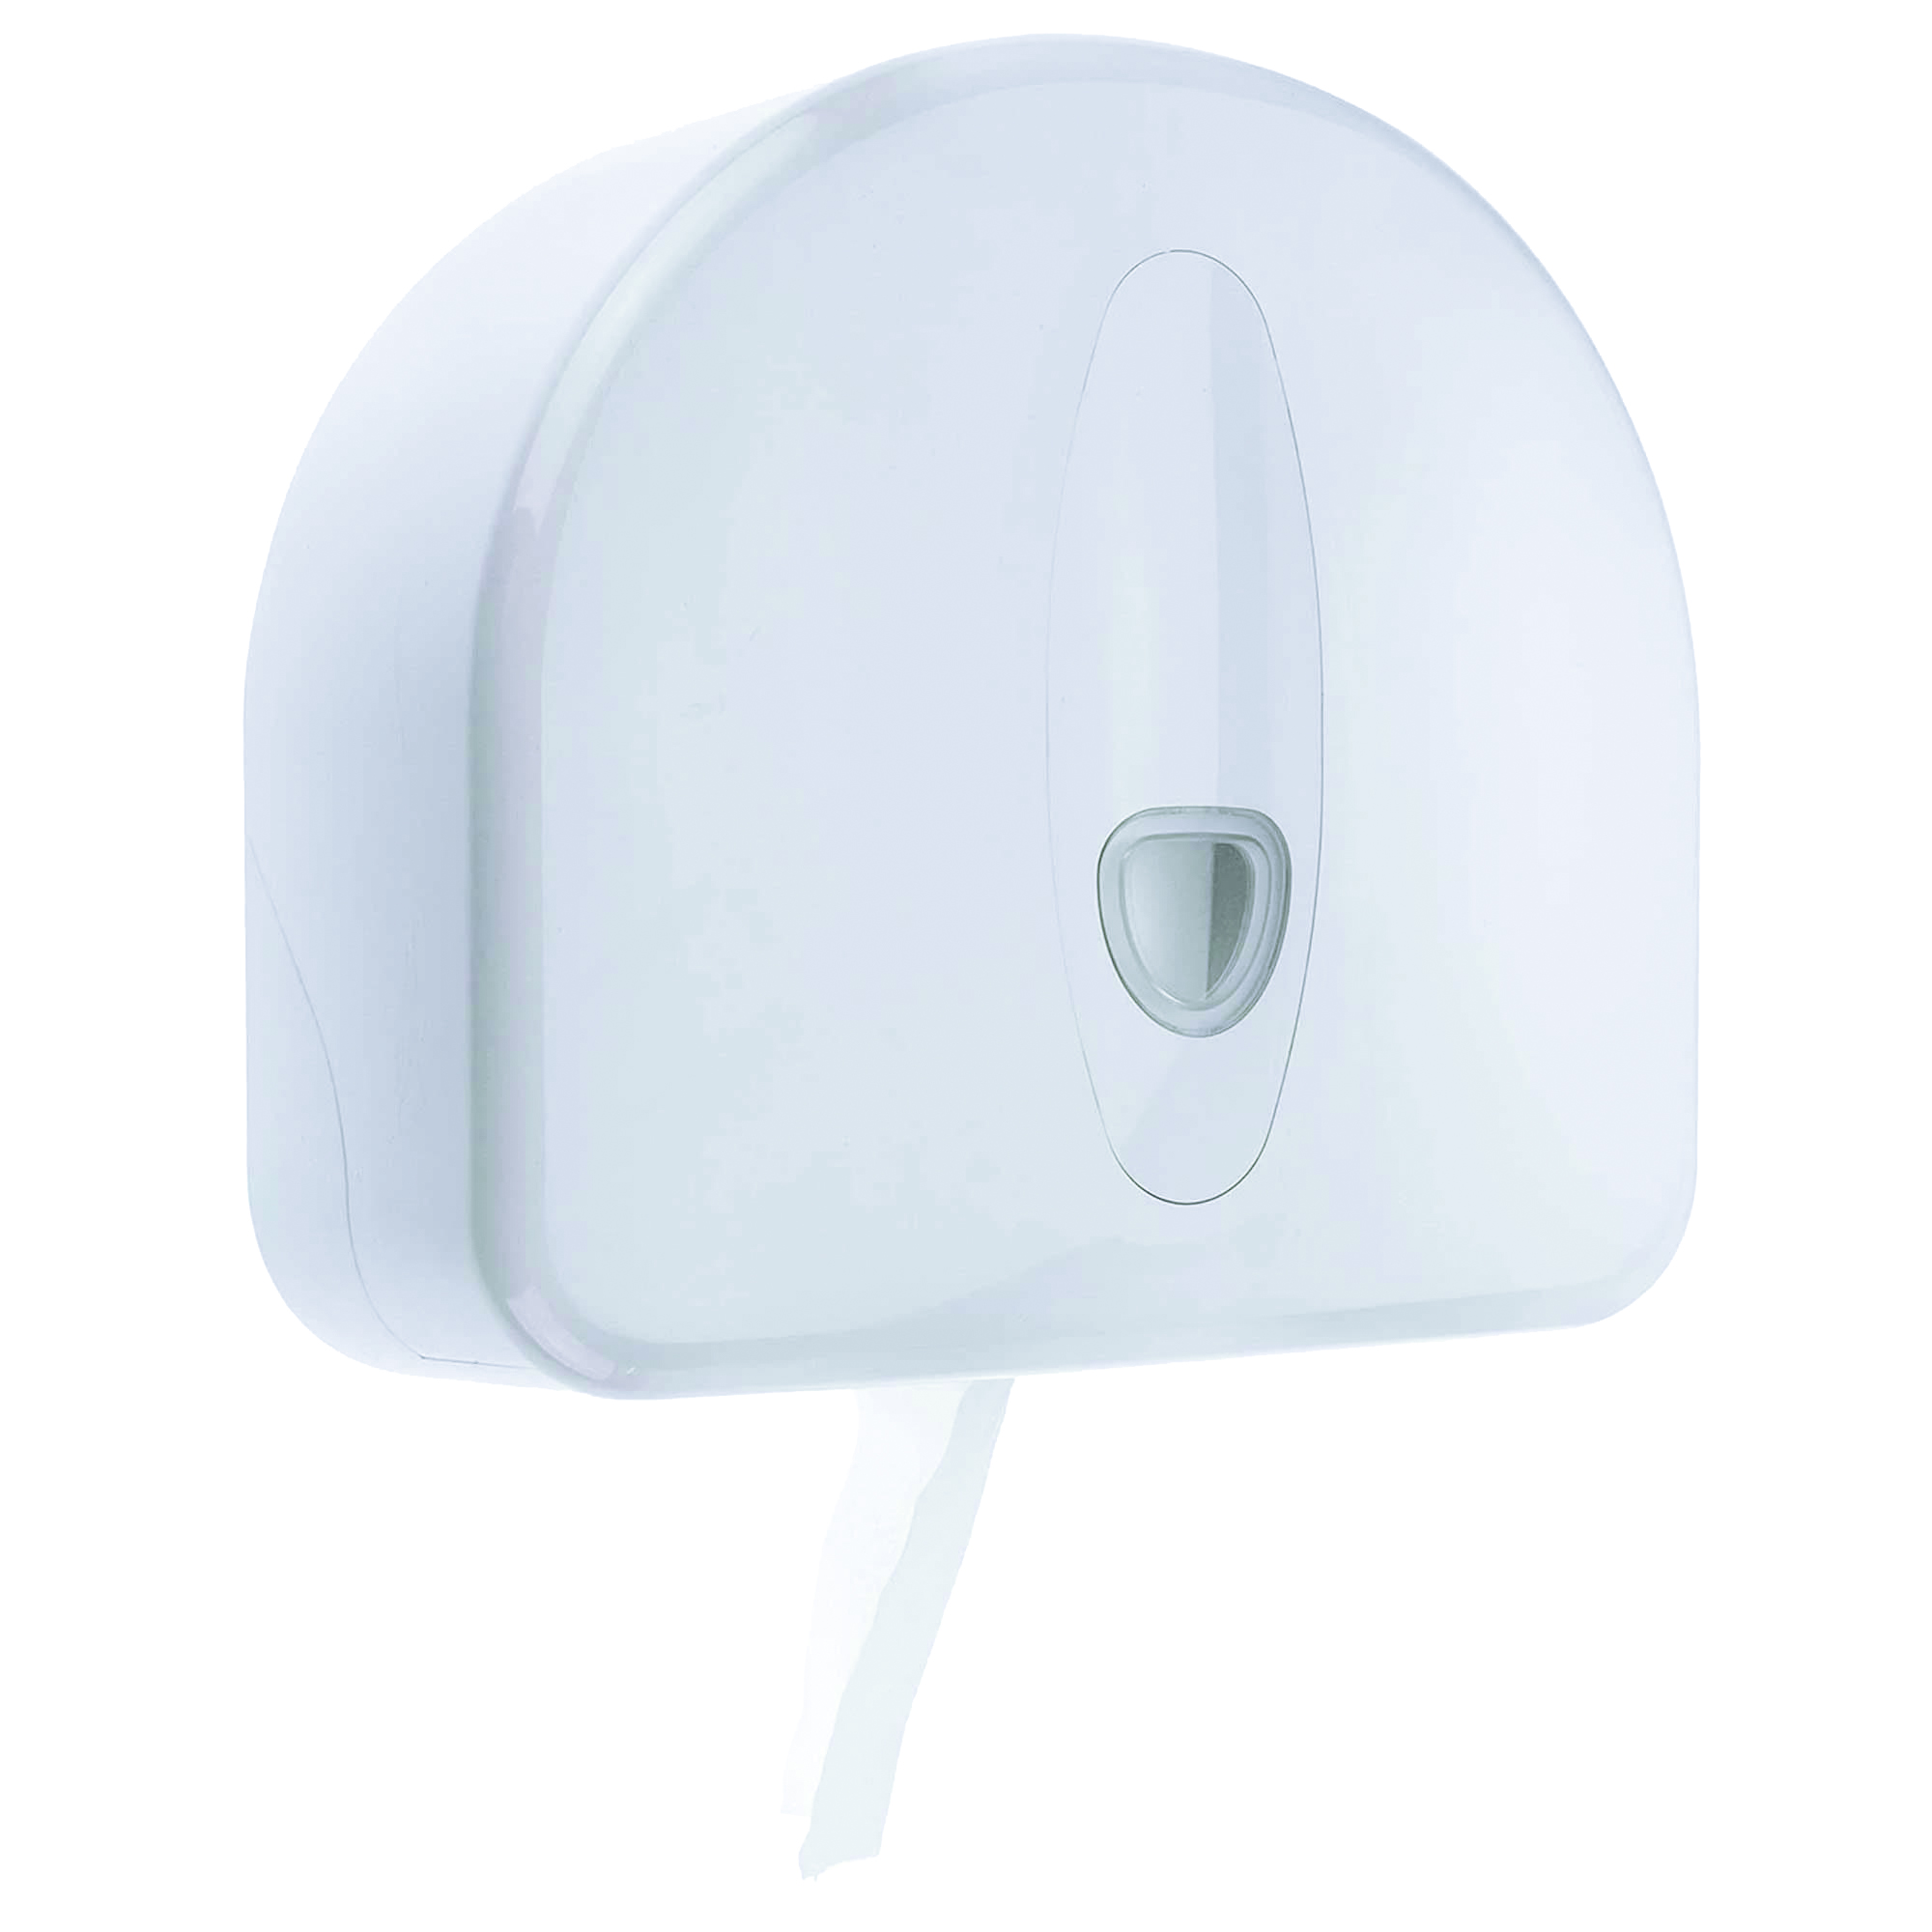 Jumbo Plastic Toilet Roll Dispenser. Takes up to a 400m Roll - White 